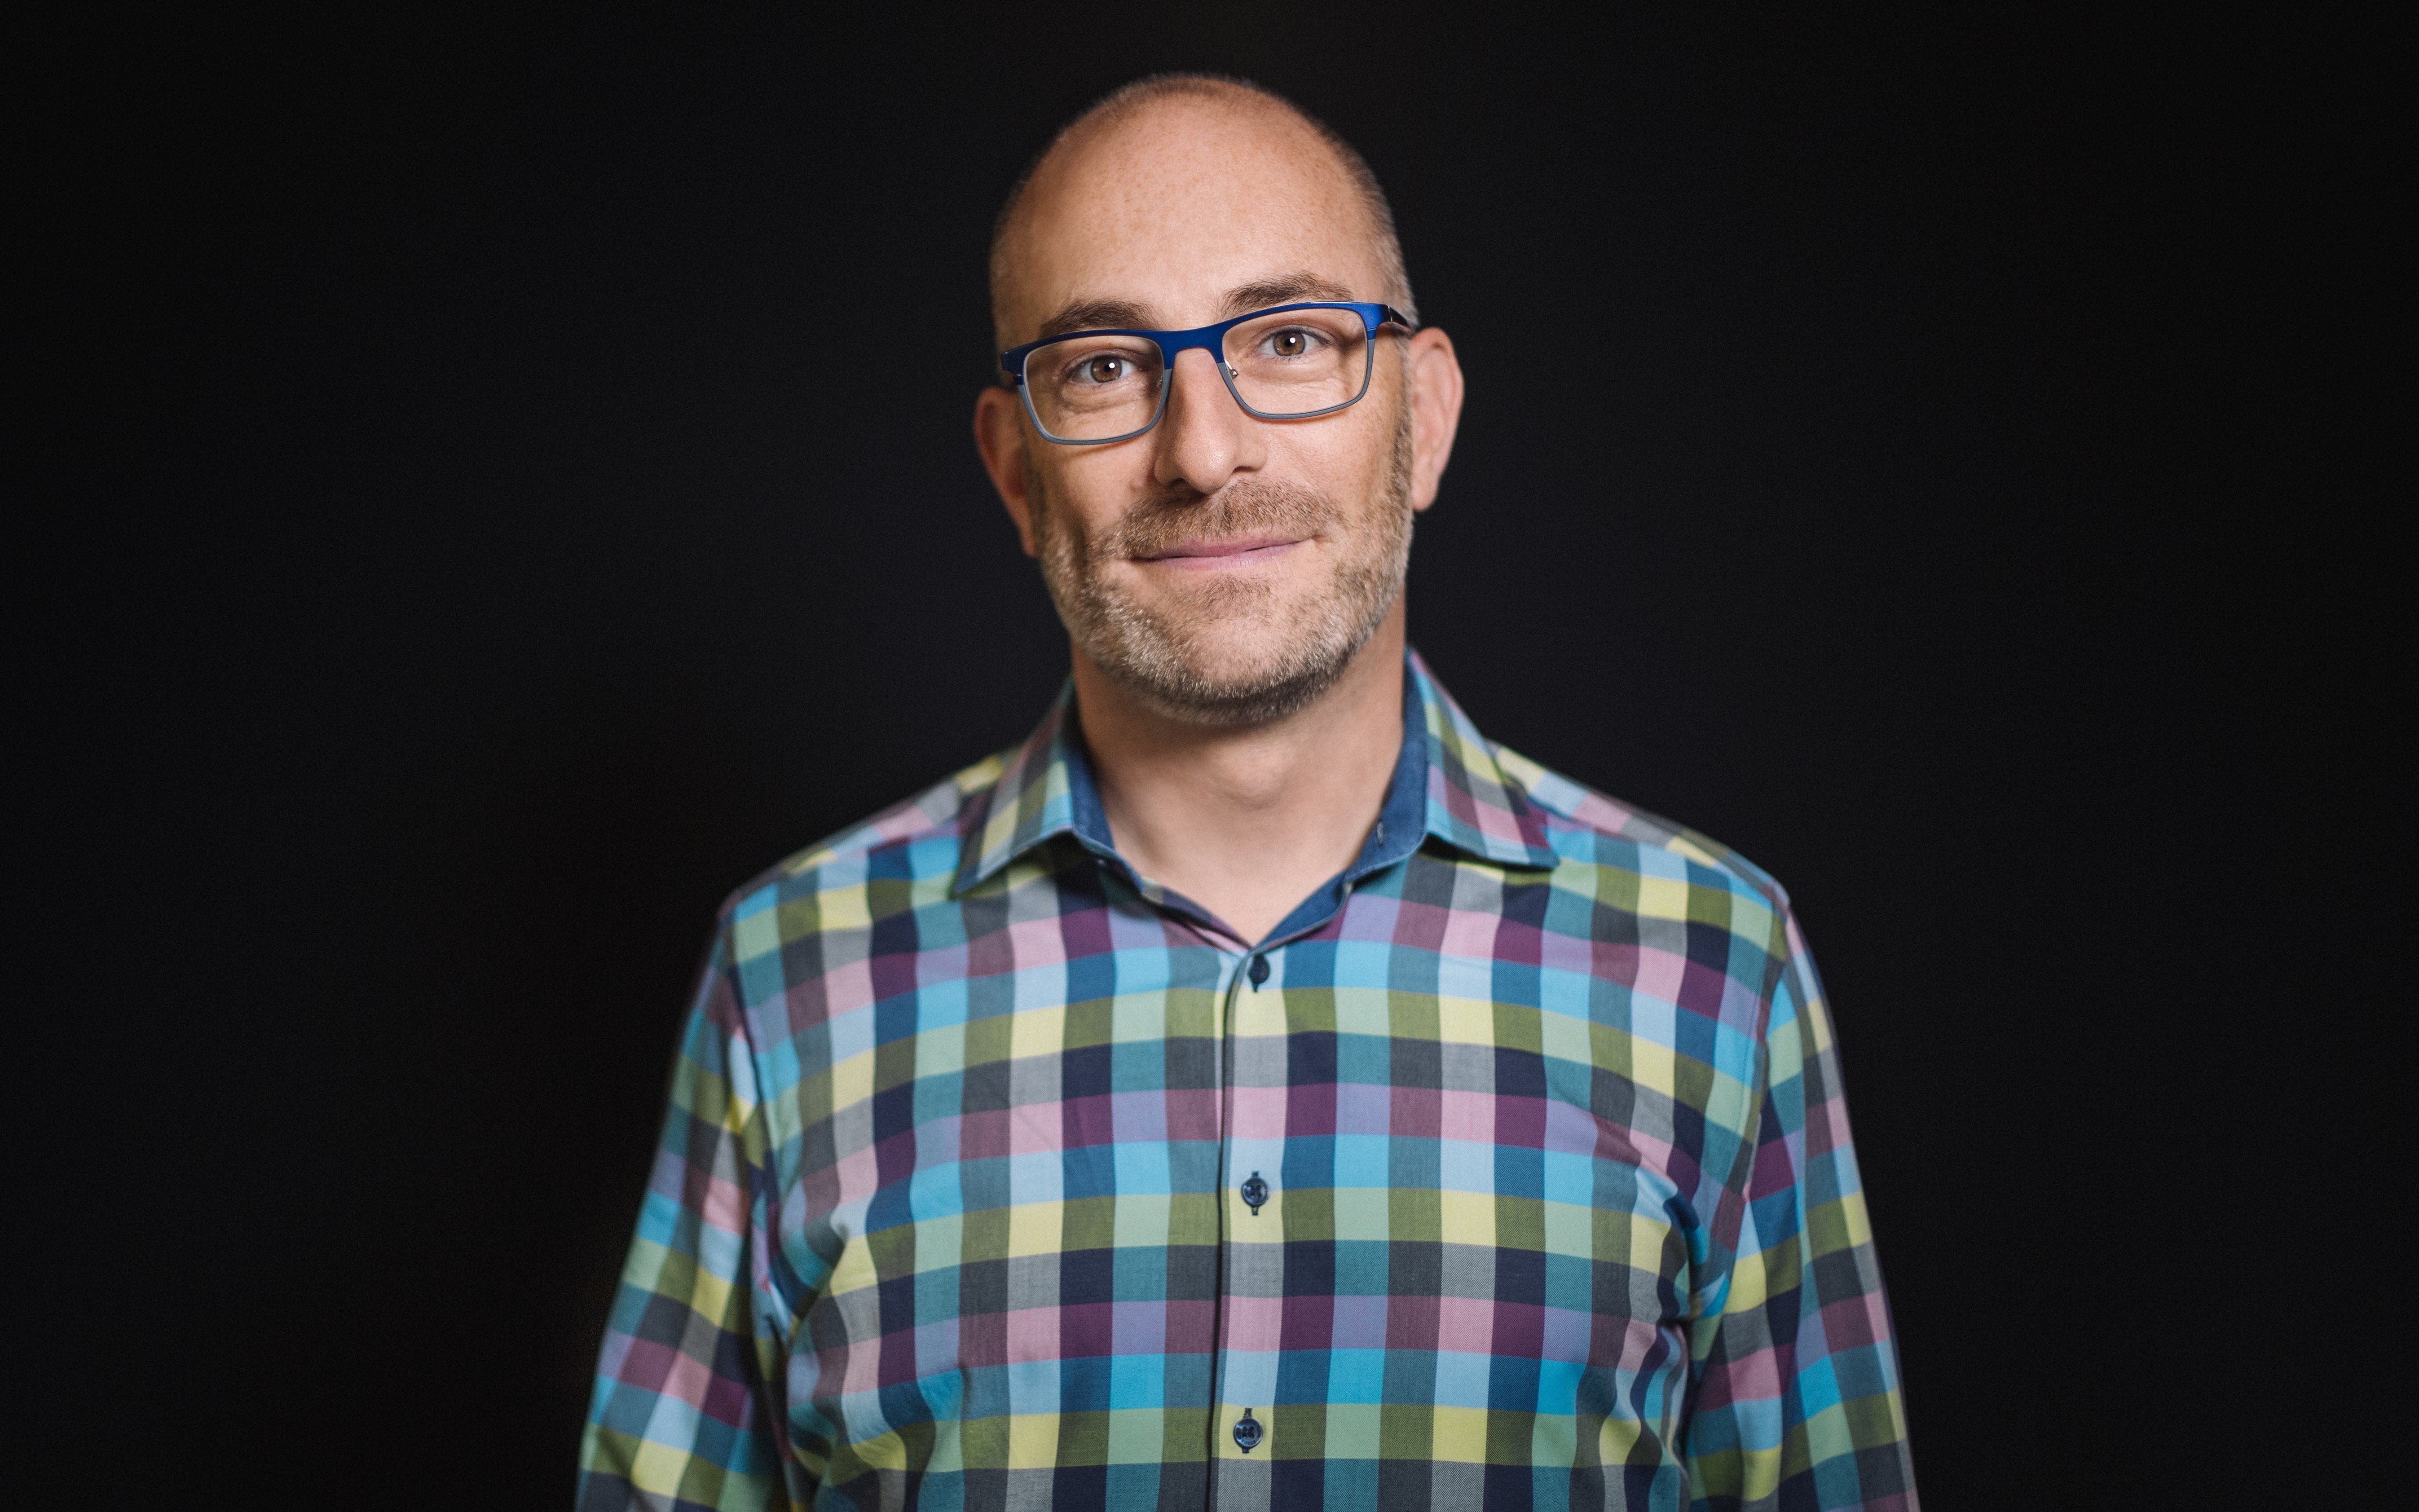 Headshot - Andrew Simon. A man with a colorfull plaid shirt, blue framed glasses, and a kind smile